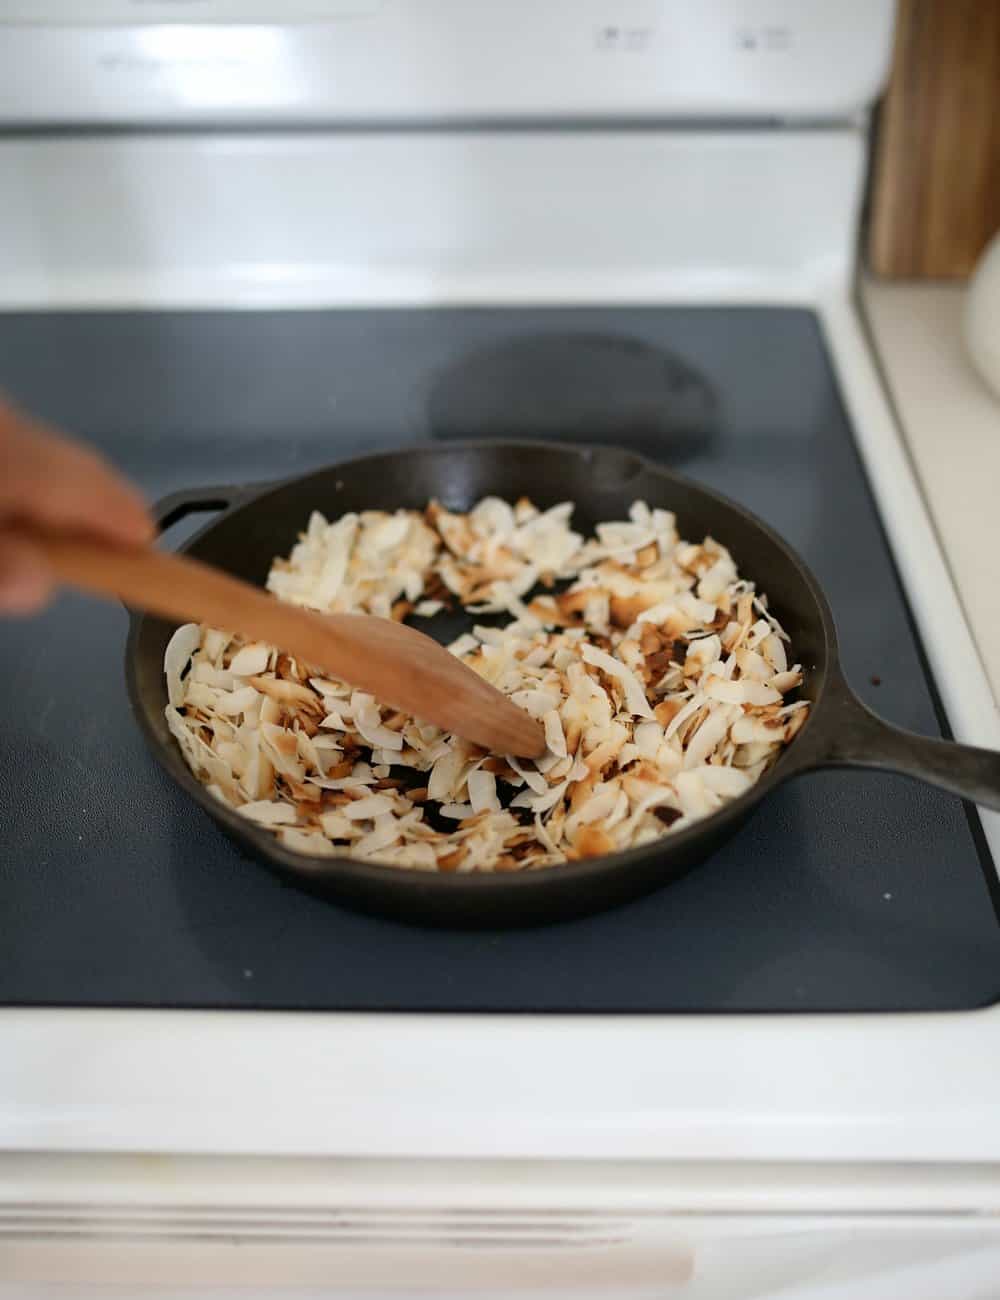 coconut flakes being toasted o a cast iron skillet with a wooden spoon.